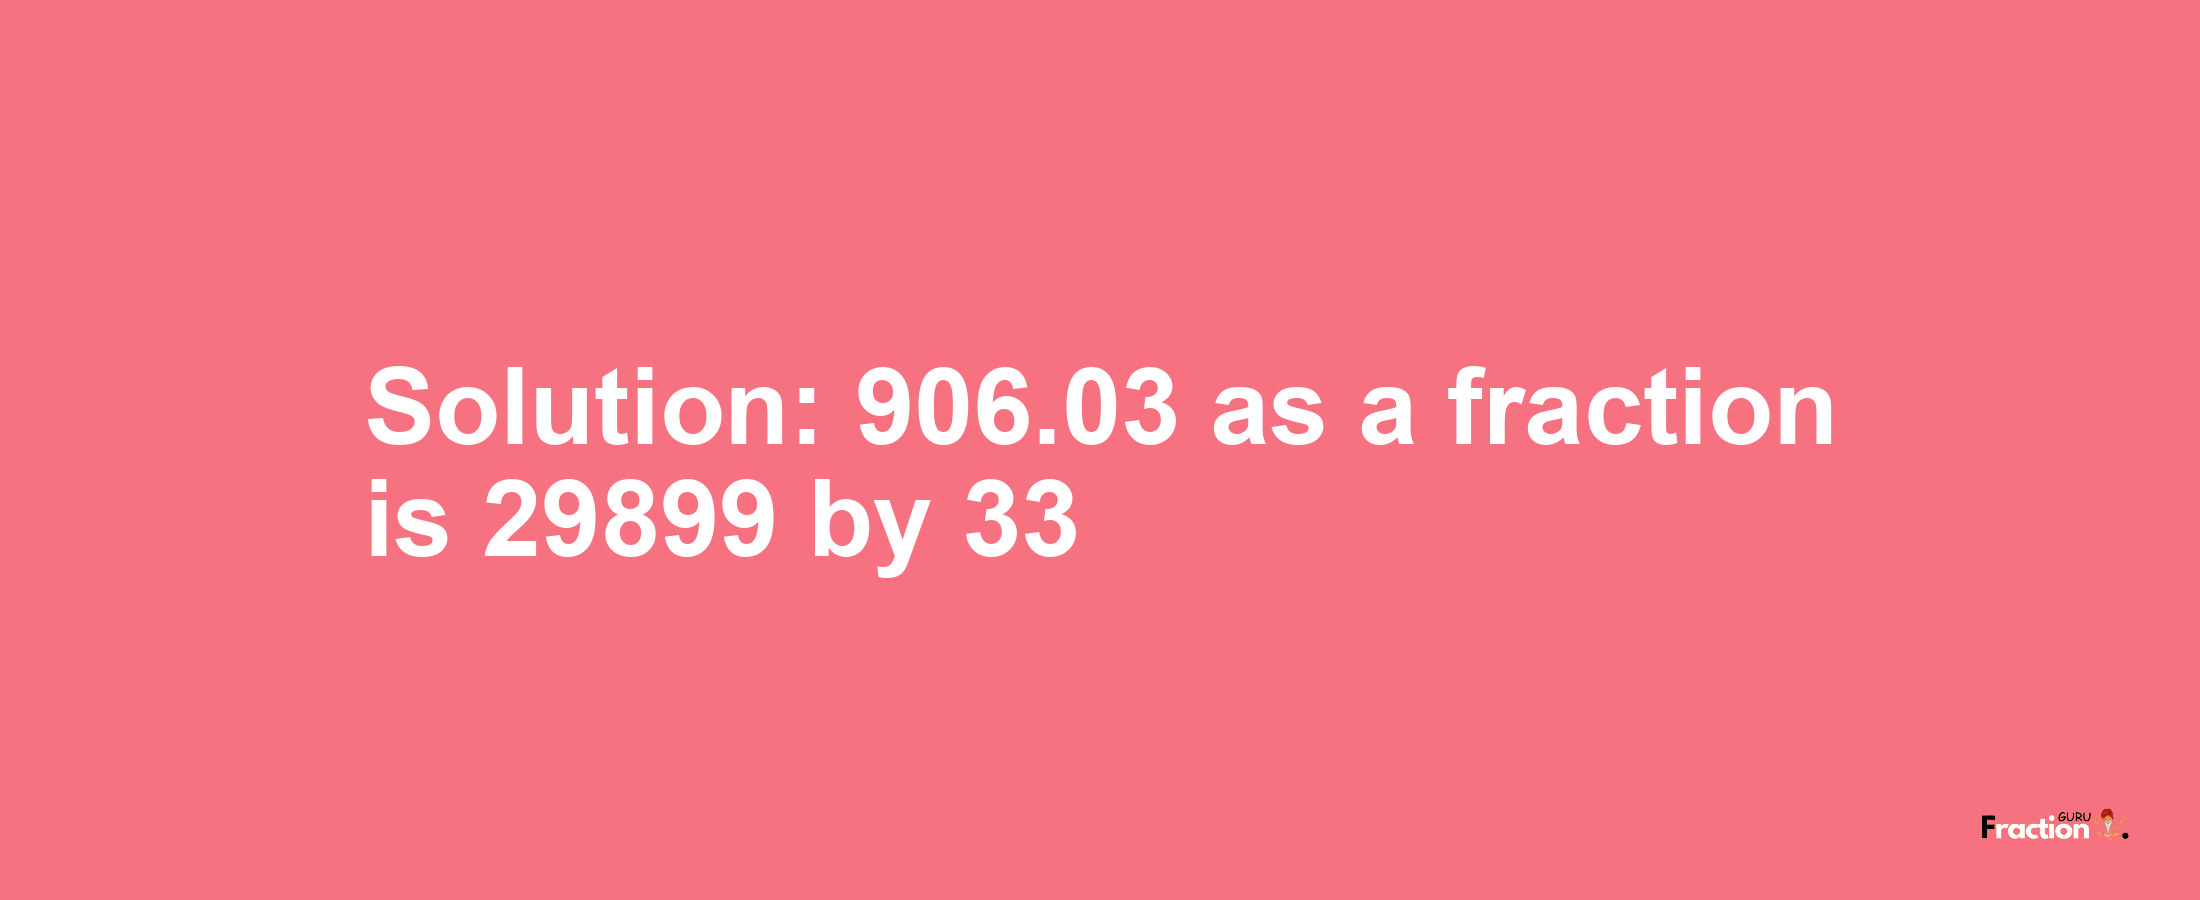 Solution:906.03 as a fraction is 29899/33